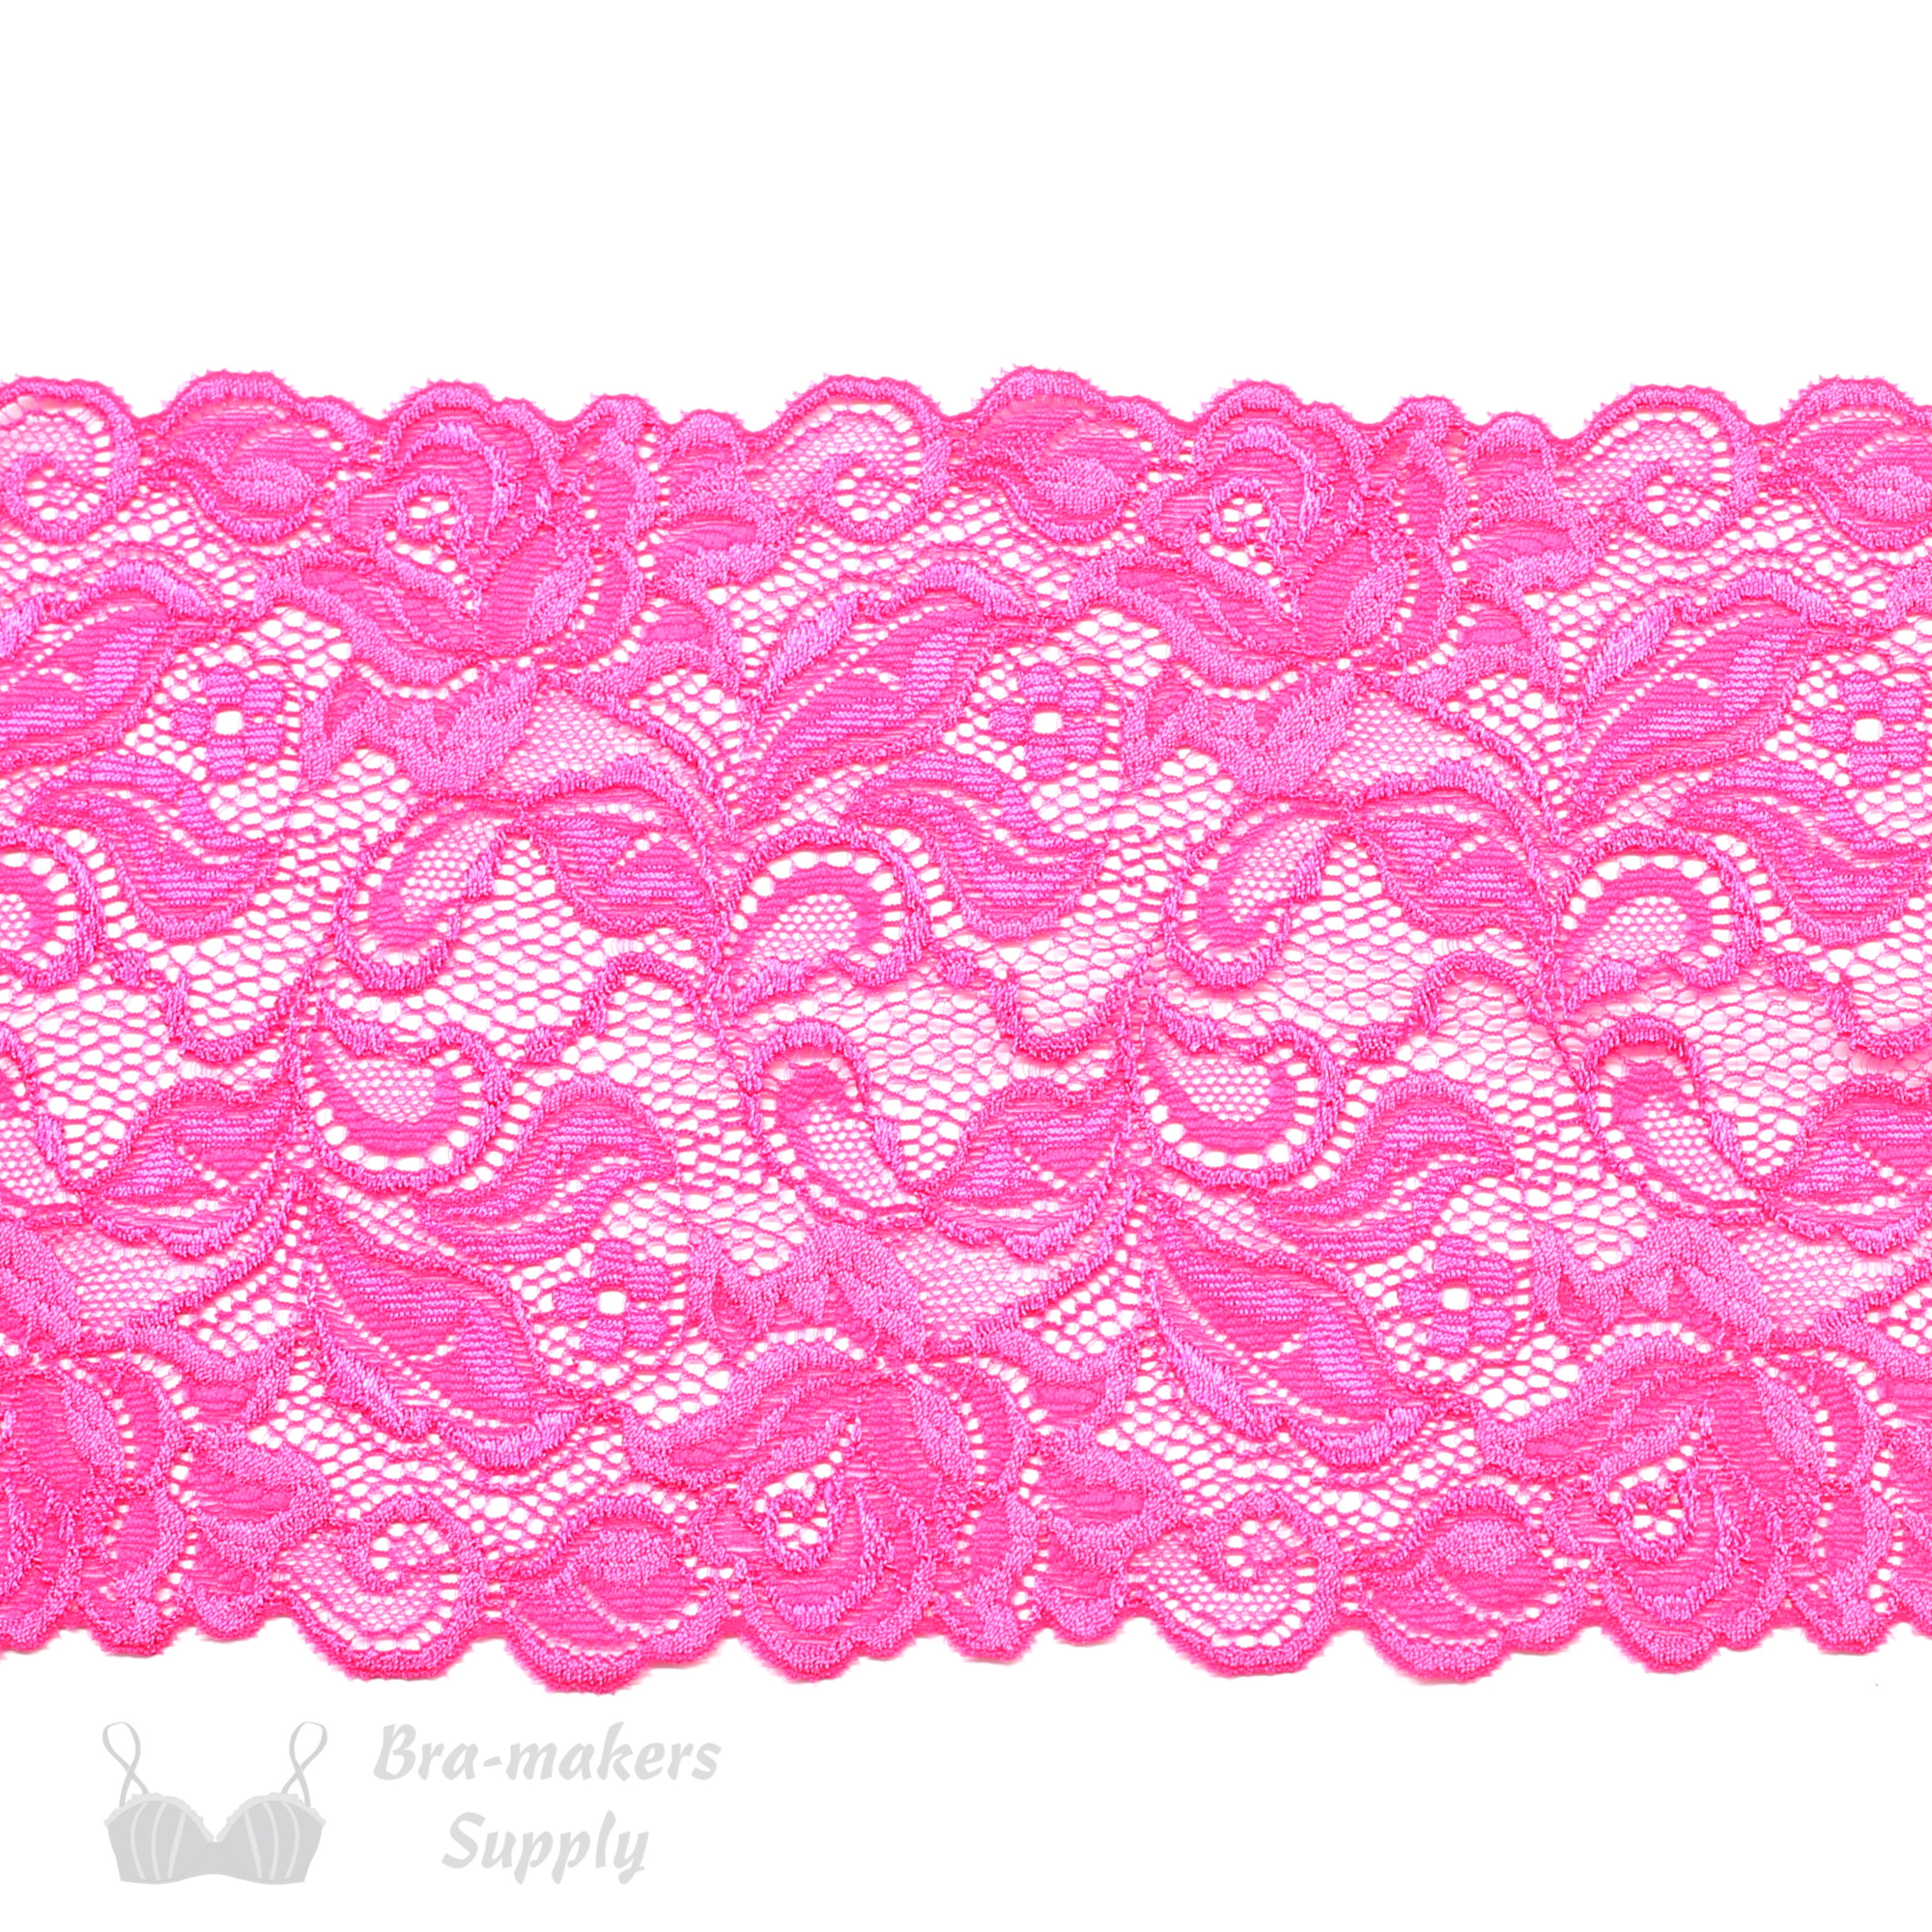 Six Inch Bubblegum Pink Floral Stretch Lace - Bra-Makers Supply